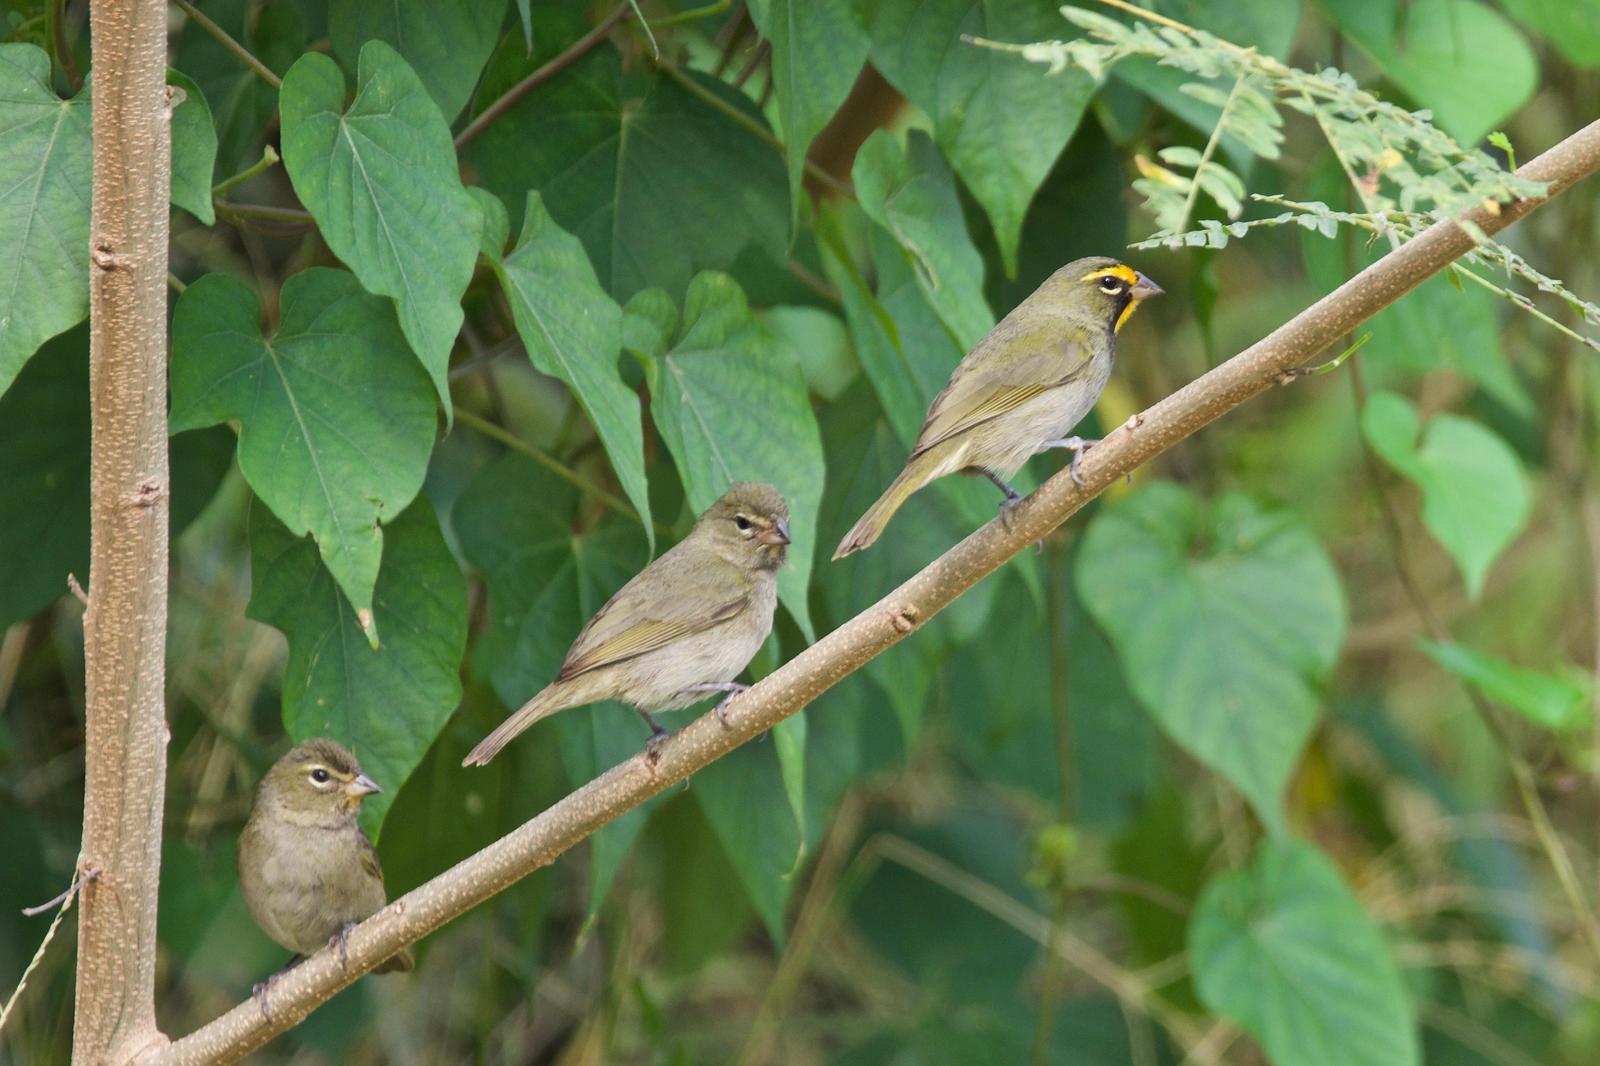 Yellow-faced Grassquit Photo by Ian Jarvie